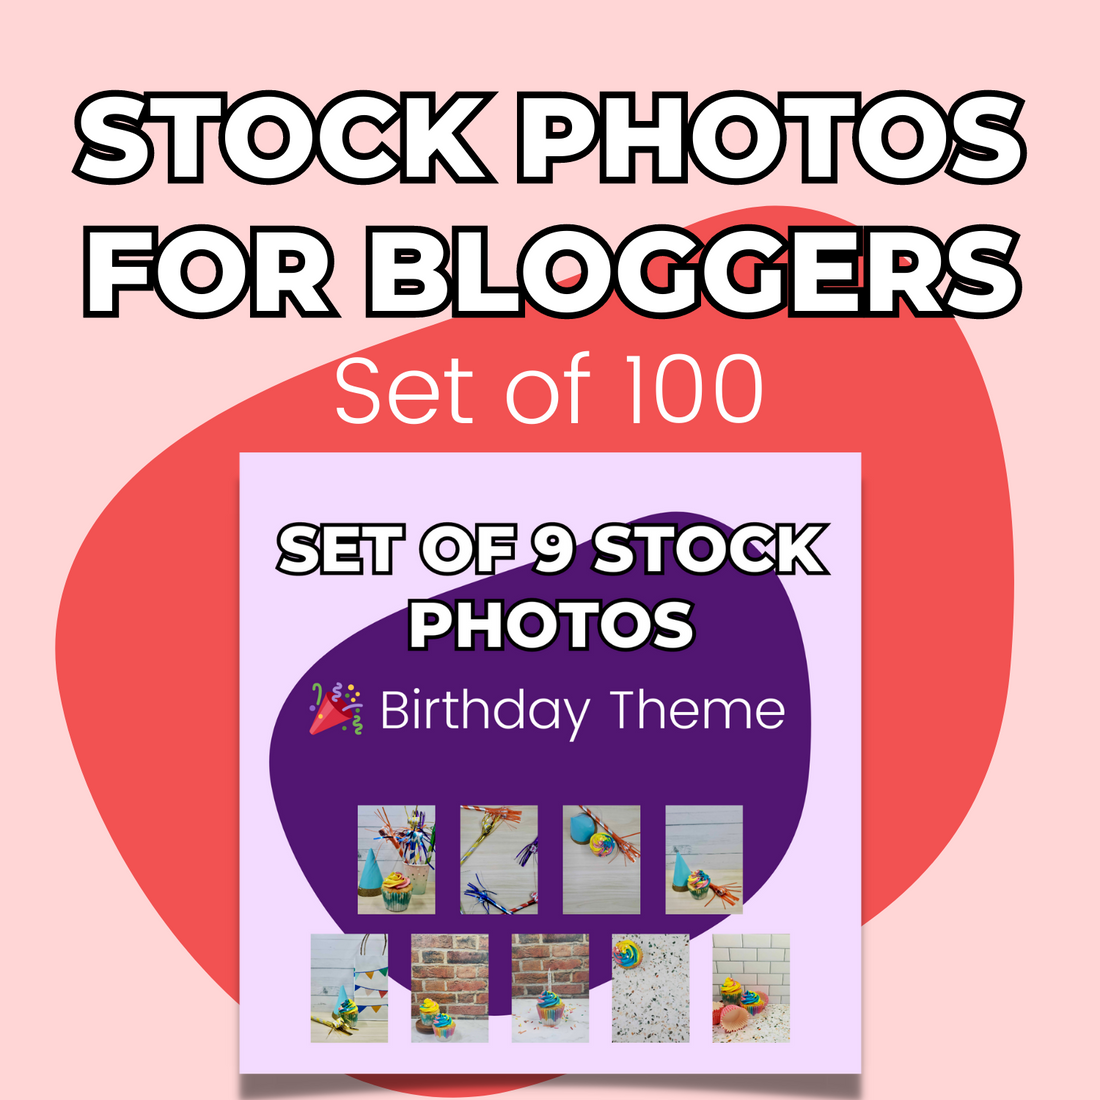 Stock Photos for Bloggers Bundle (set of 100)